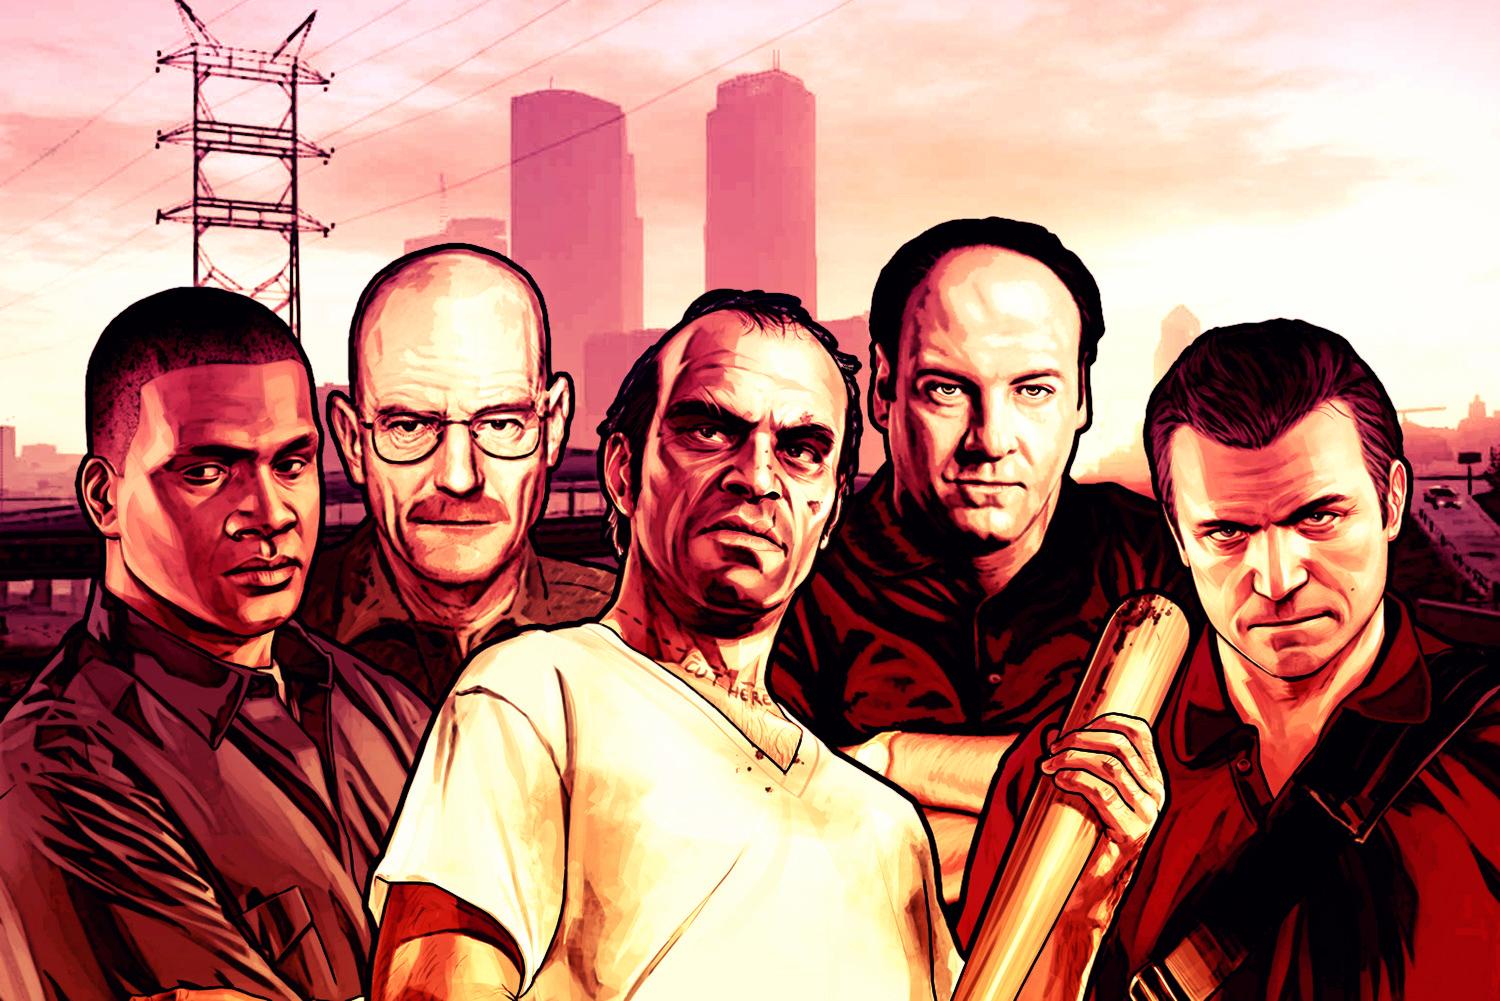 Does playing 'Grand Theft Auto' make you smarter? 